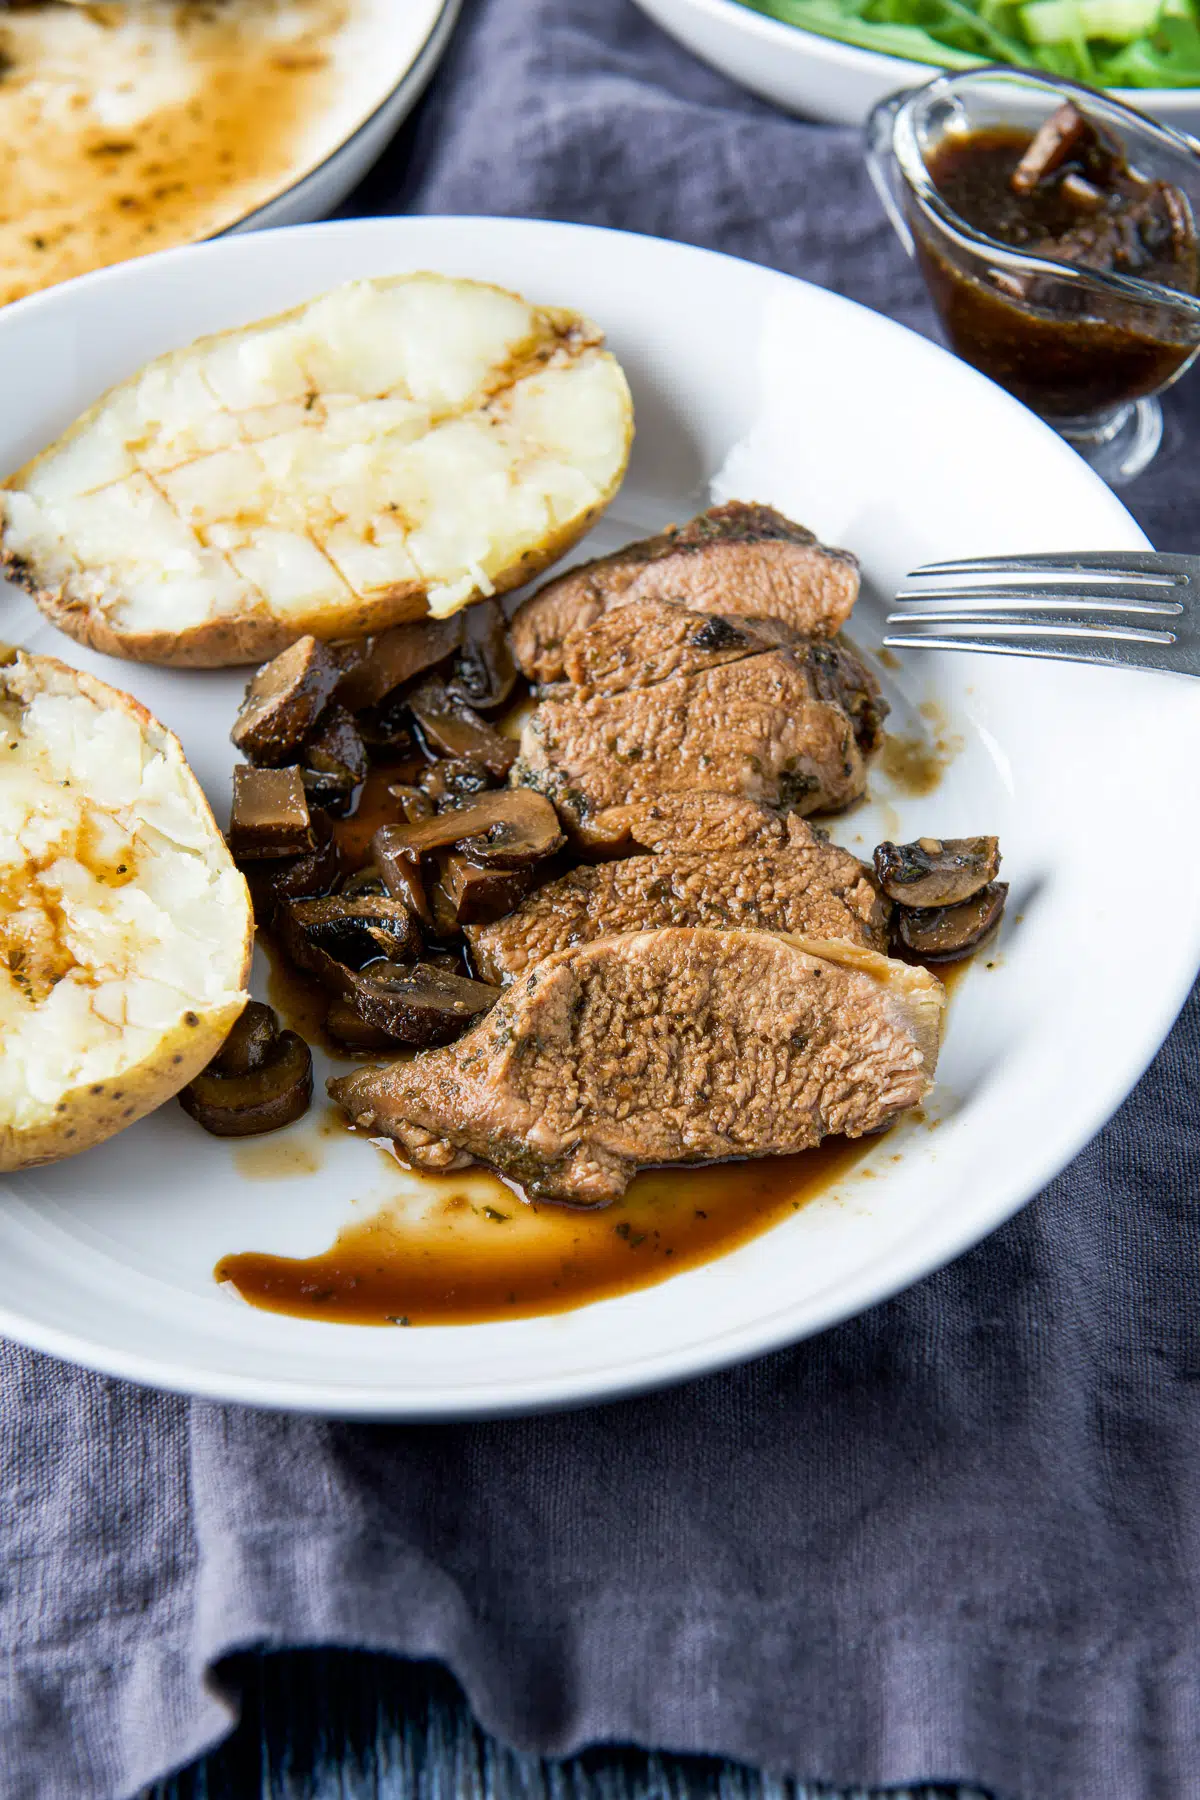 Pork slices with marinade on it with mushrooms and potato